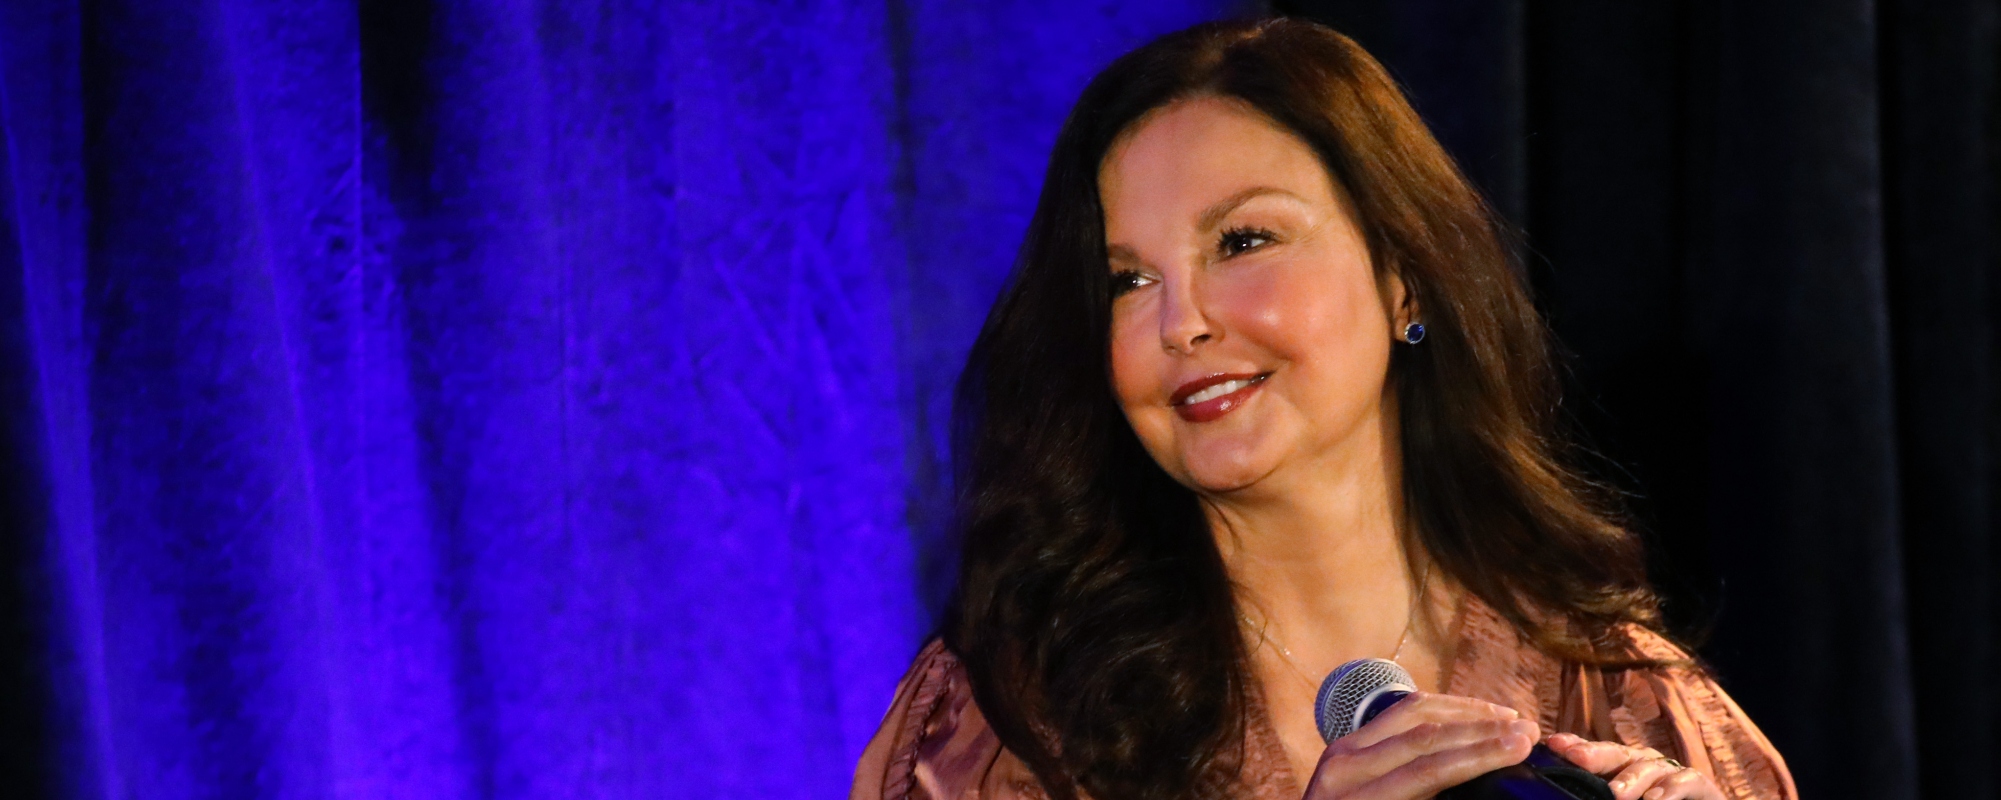 Ashley Judd Opens Up About Remembering Her Mother Naomi: “A Place Where Trauma and Grief and Transcendence Meet”